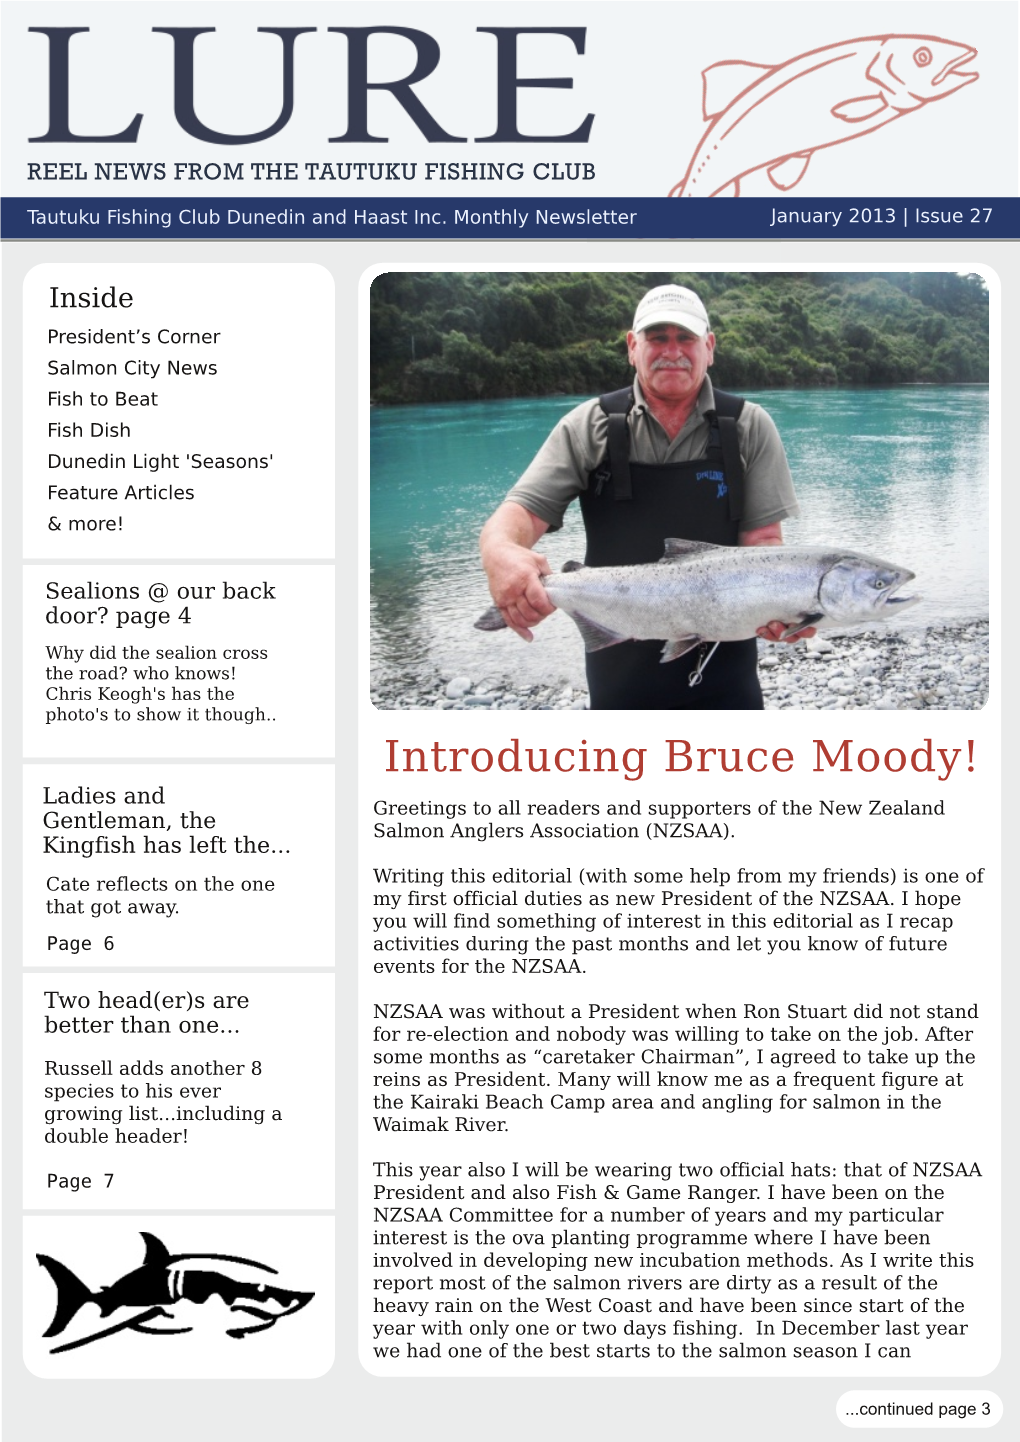 Introducing Bruce Moody! Ladies and Greetings to All Readers and Supporters of the New Zealand Gentleman, the Salmon Anglers Association (NZSAA)